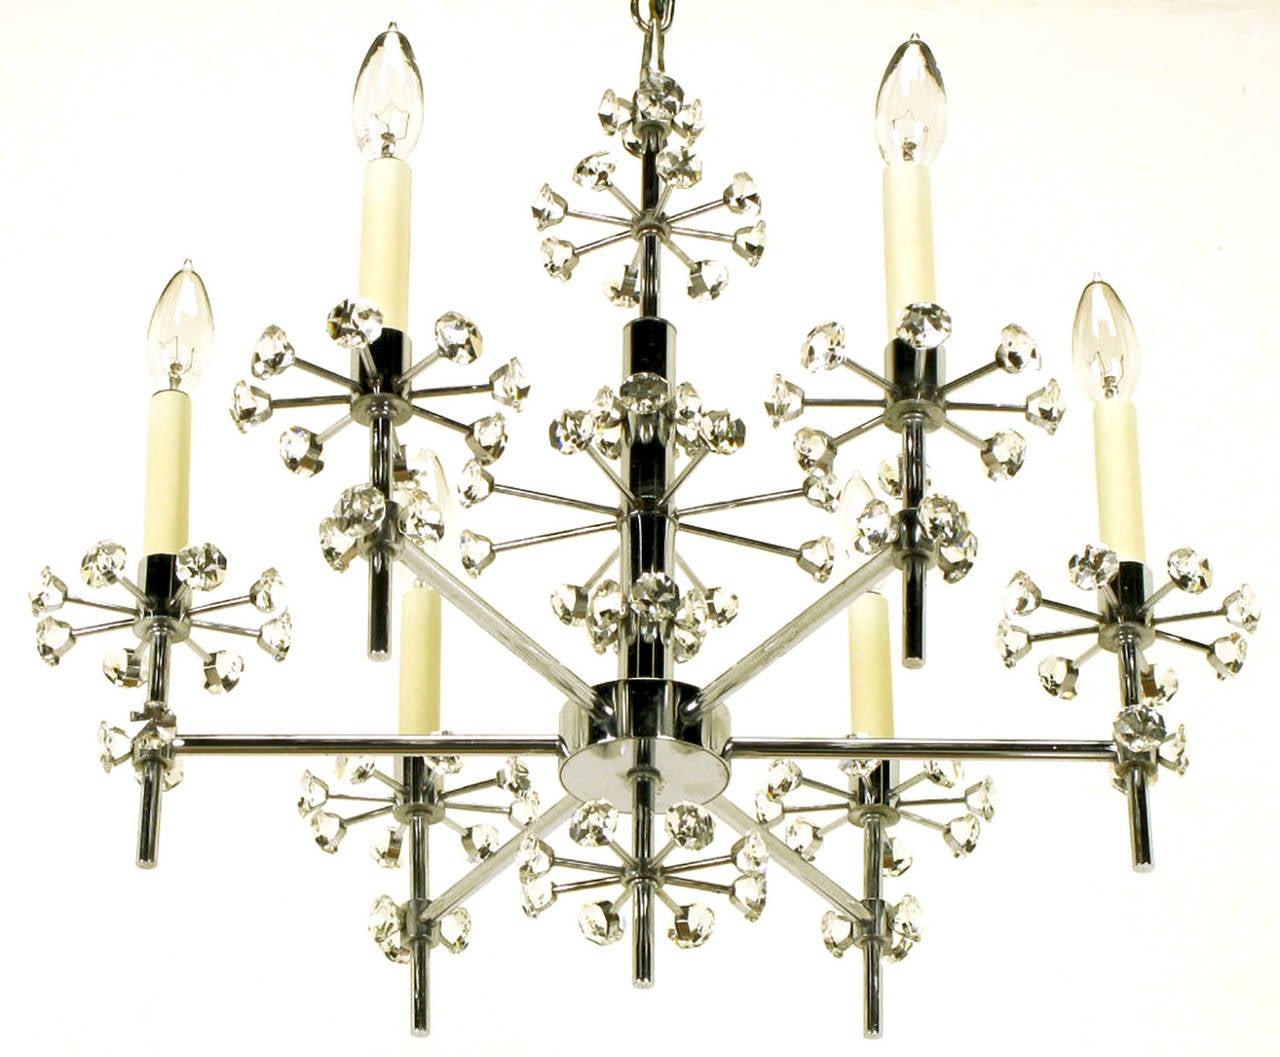 Unusual chrome six-arm chandelier with orbital crystal details that extend from the risers and centre stem on metal bars. Made in Canada, where Lightolier had midcentury production. Sold with chain and canopy. Pair available. Chandelier body height